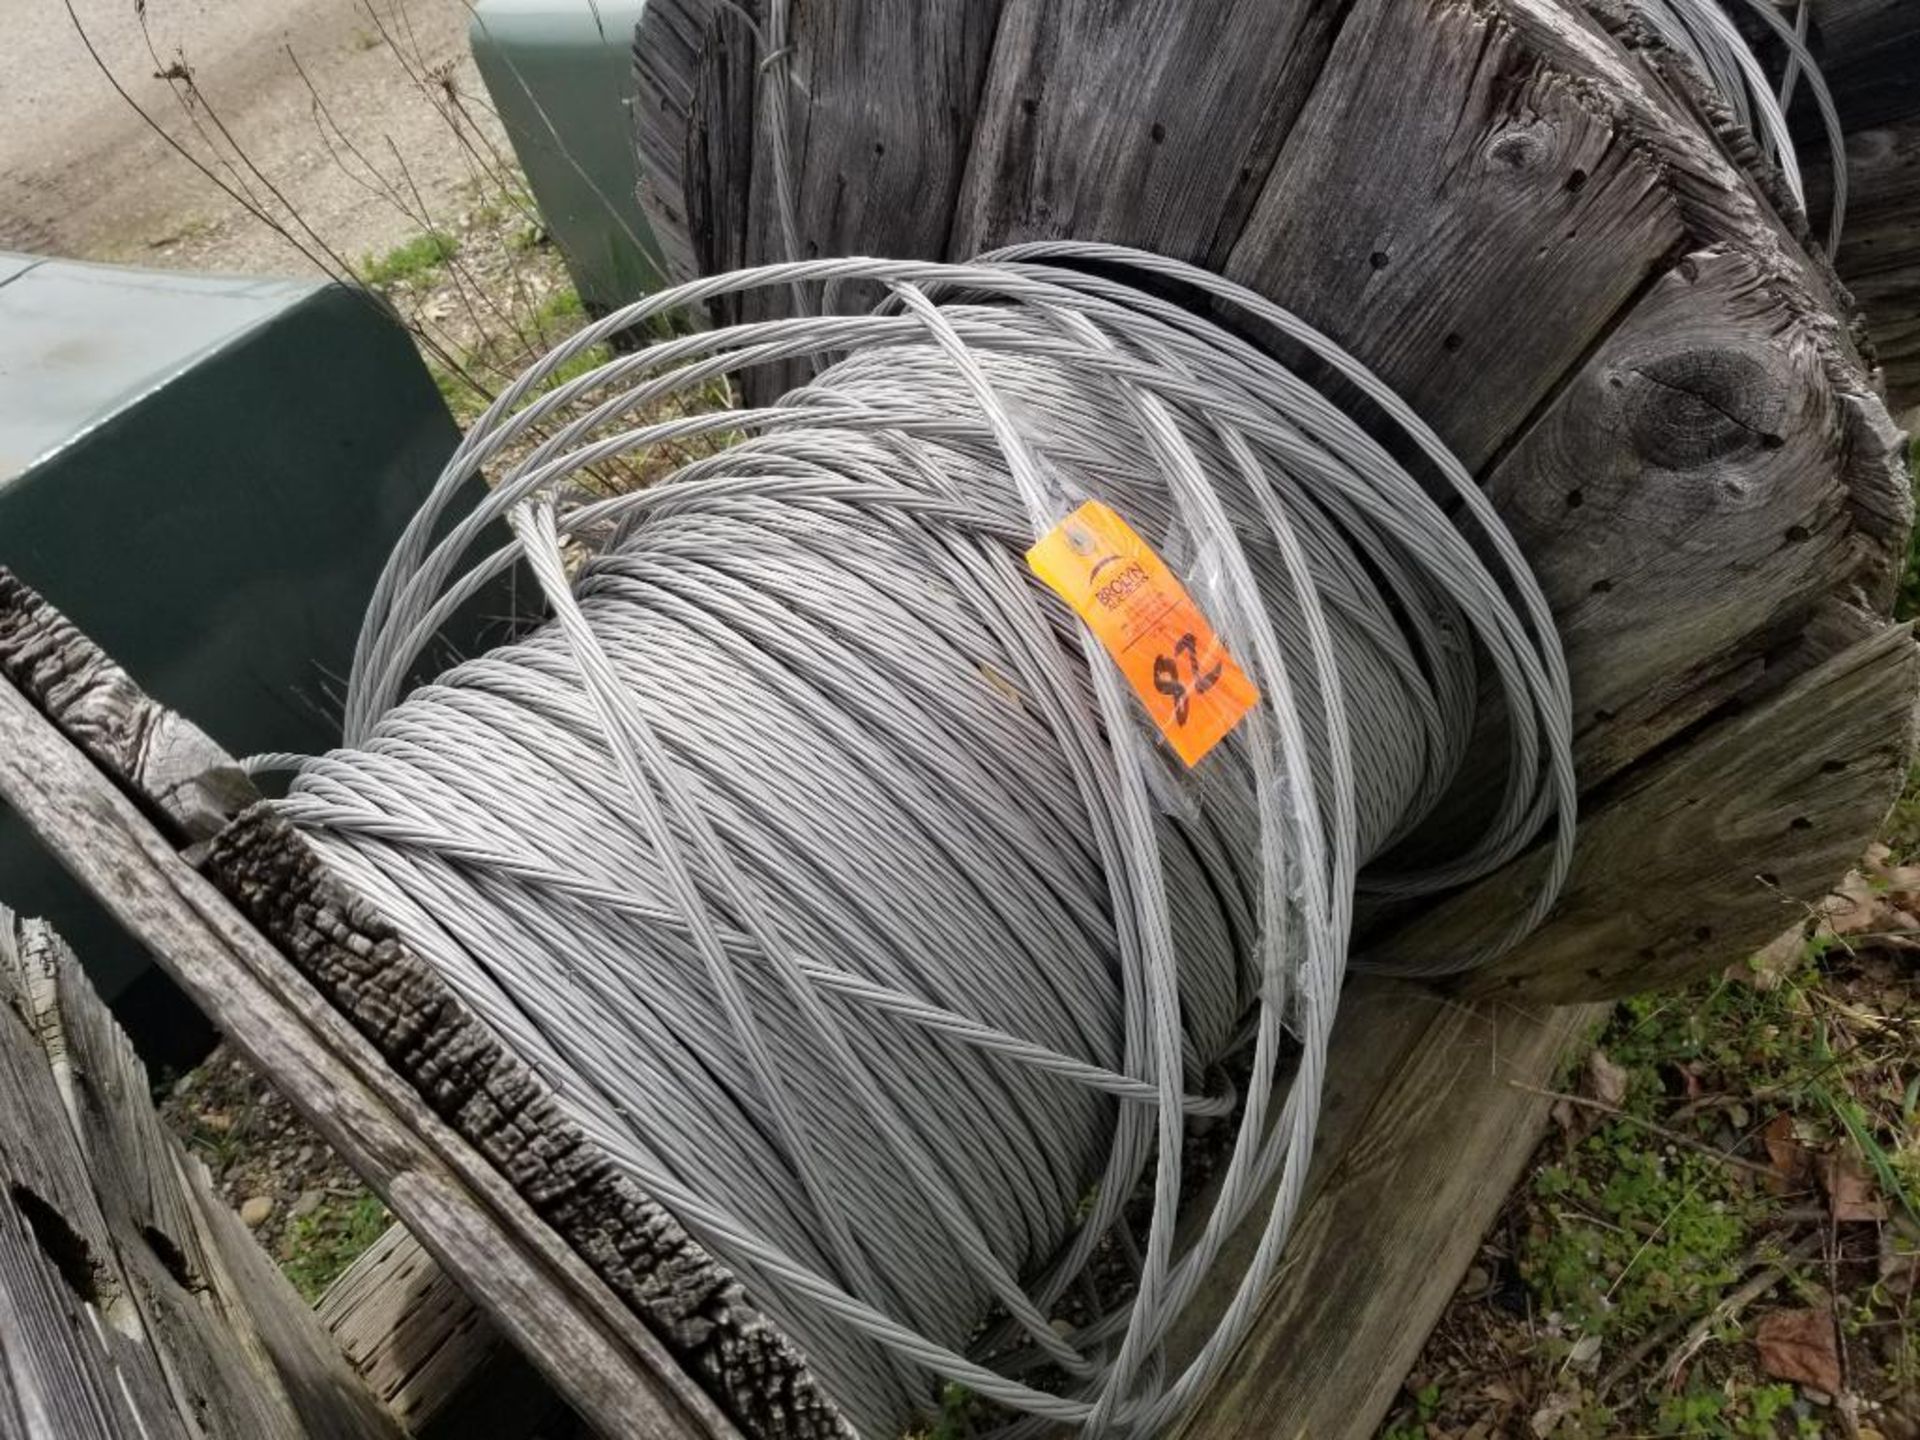 Spool of bare wire. - Image 2 of 3